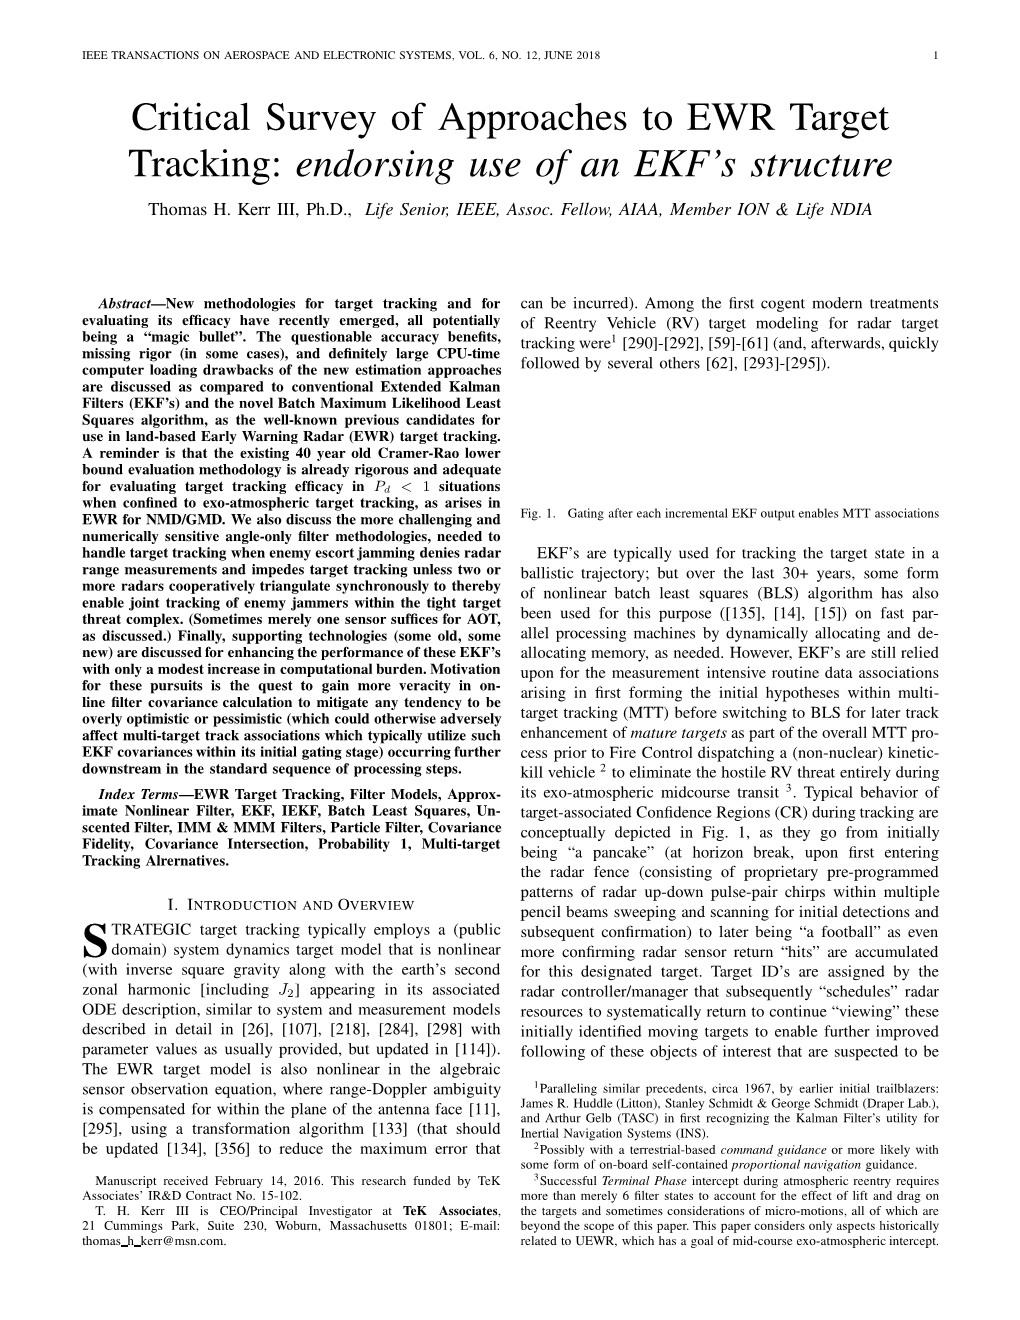 Critical Survey of Approaches to EWR Target Tracking: Endorsing Use of an EKF’S Structure Thomas H